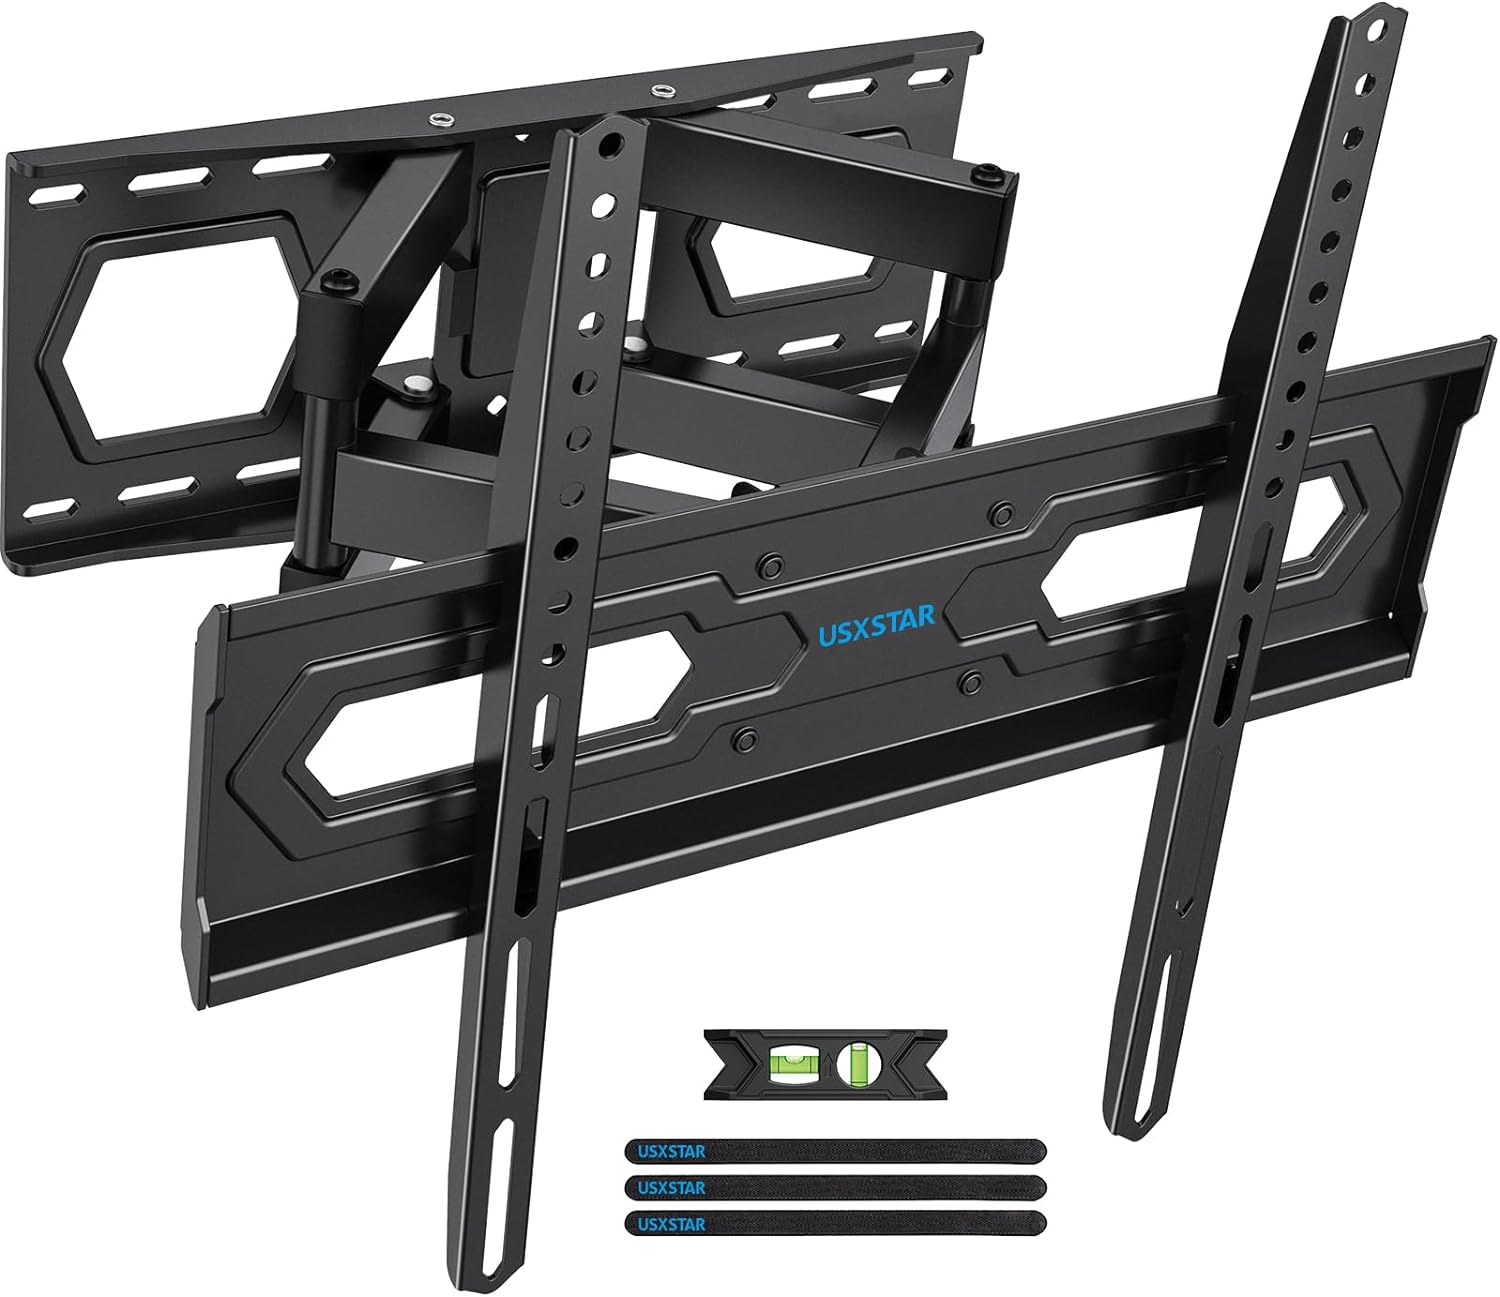 Full Motion TV Wall Mount Bracket for Most 32-70 inch TVs, Swivel Extension Tilting Leveling TV Mount, Max VESA 400x400mm, Holds up to 110 lbs 16 Wood Studs with Hole Drilling Template by USX STAR